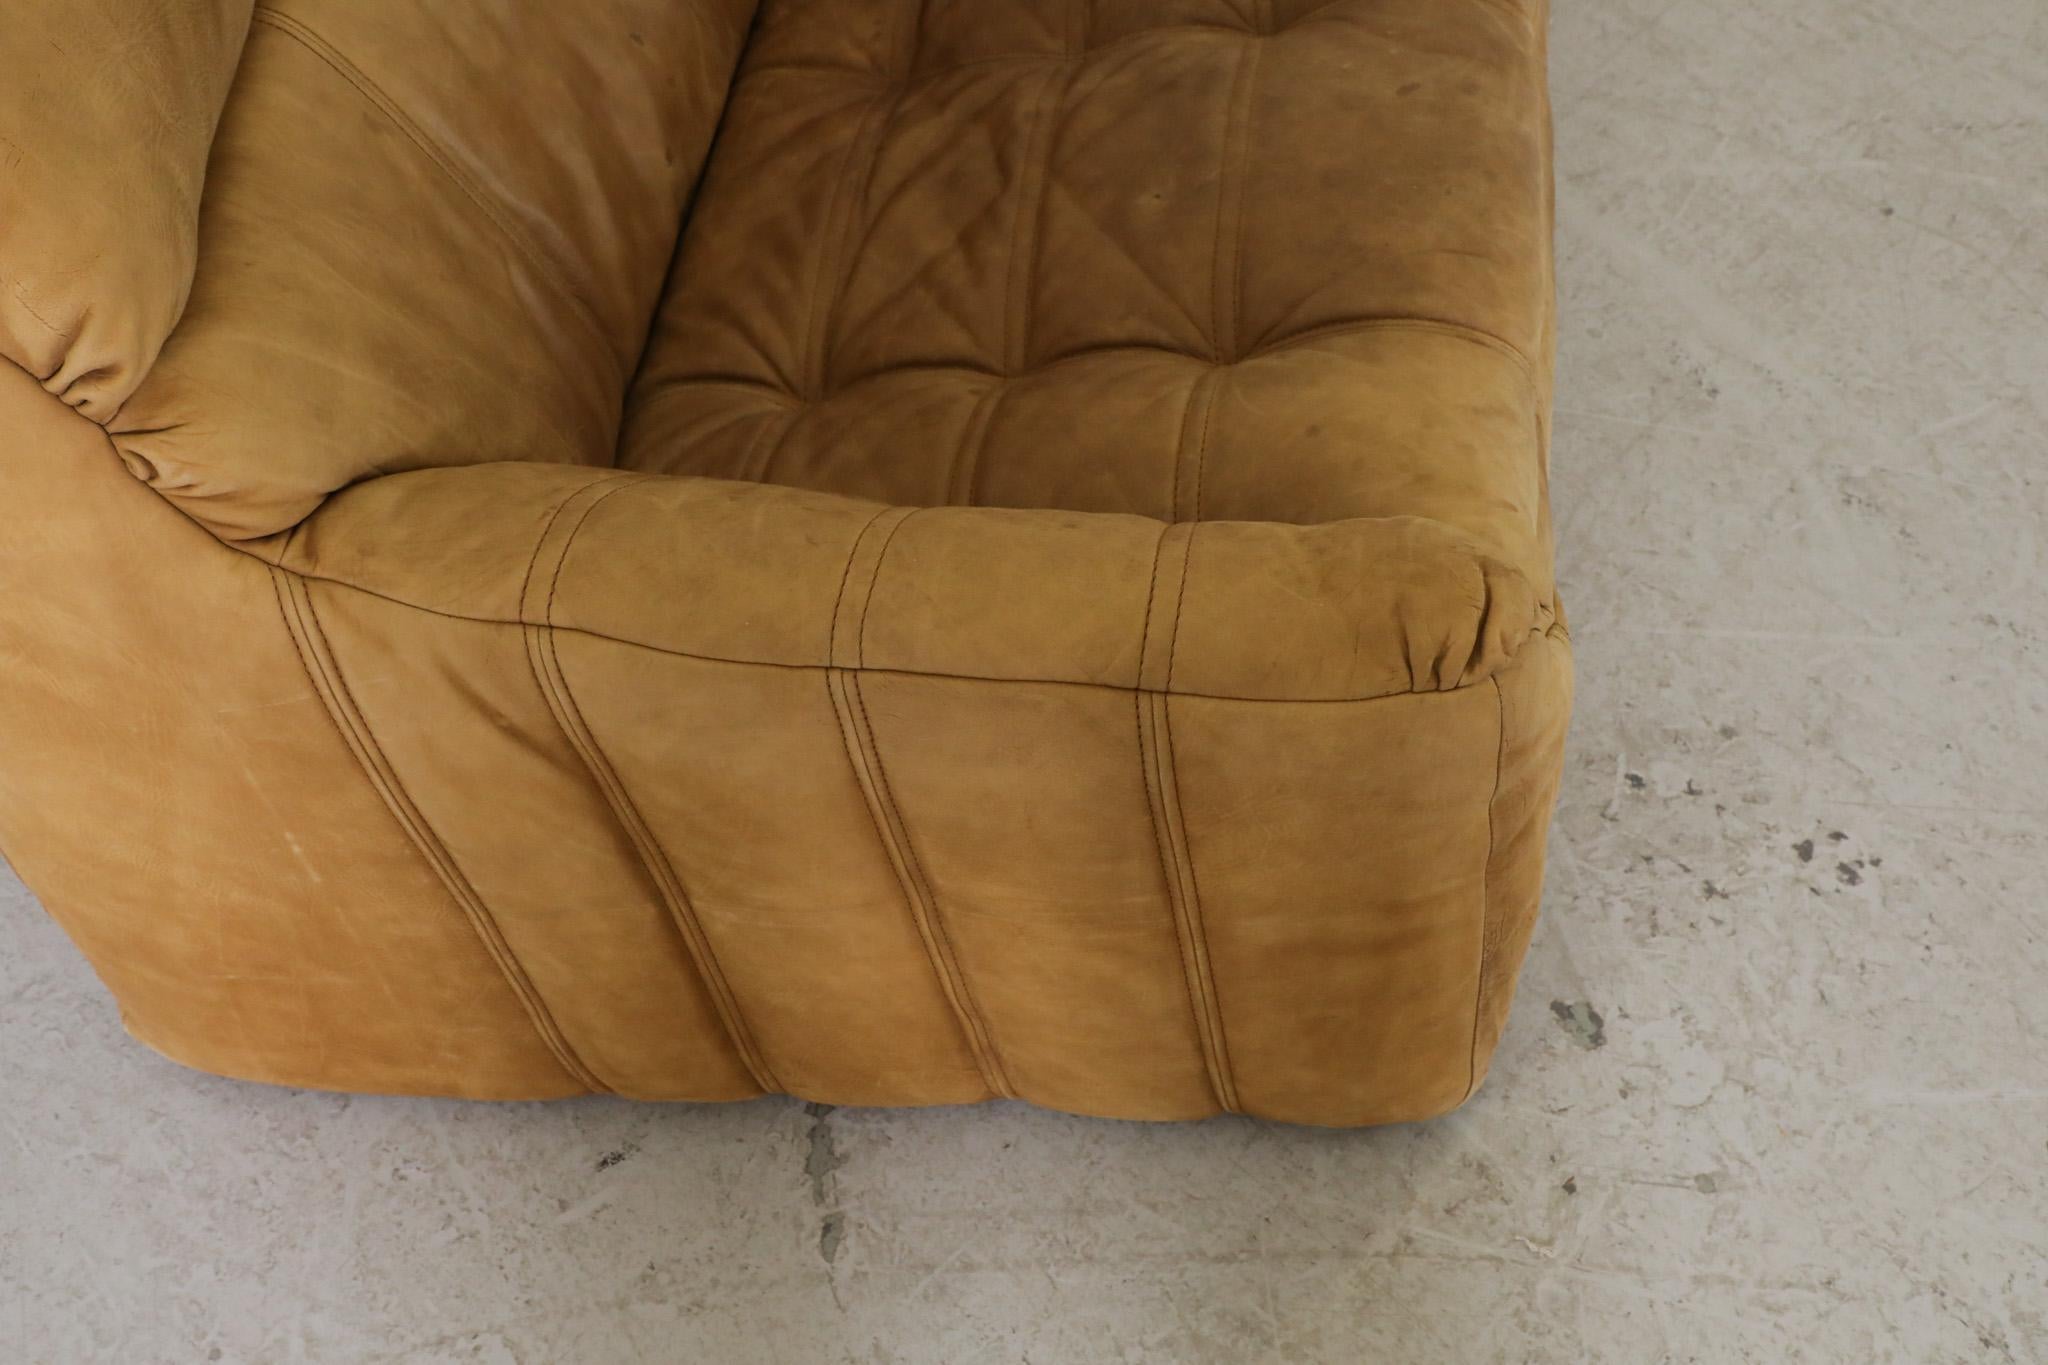 Rolf Benz Soft Form Buck Leather Loveseats, 1970s For Sale 6